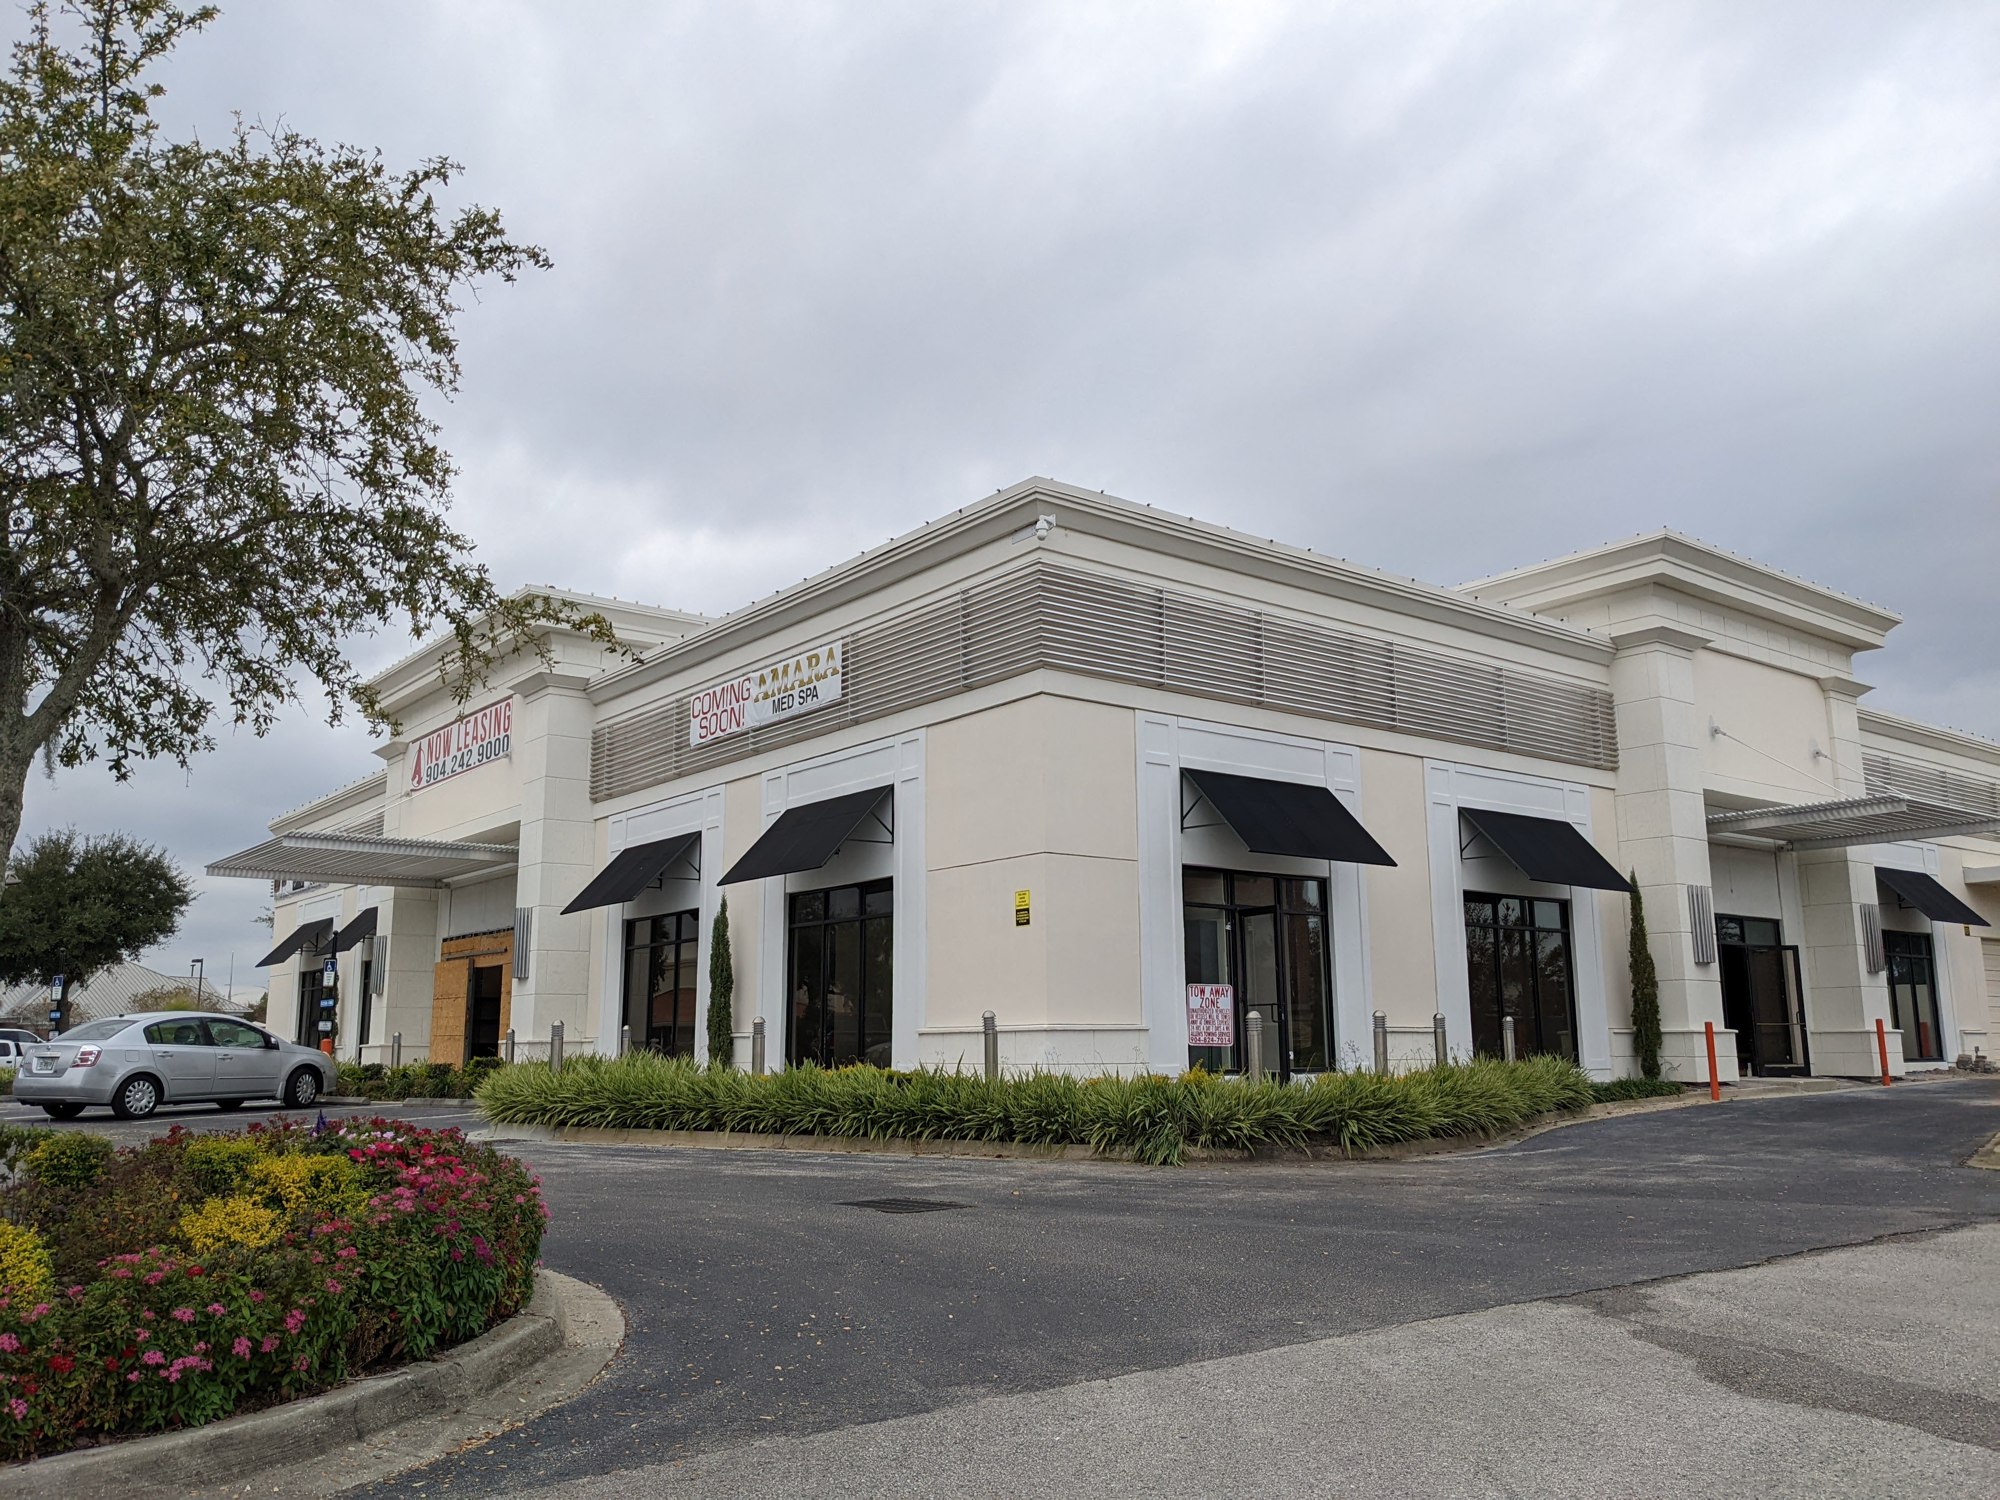 Town Center Plaza owned by Ashco Inc. at 4853 Big Island Drive near St. Johns Town Center.